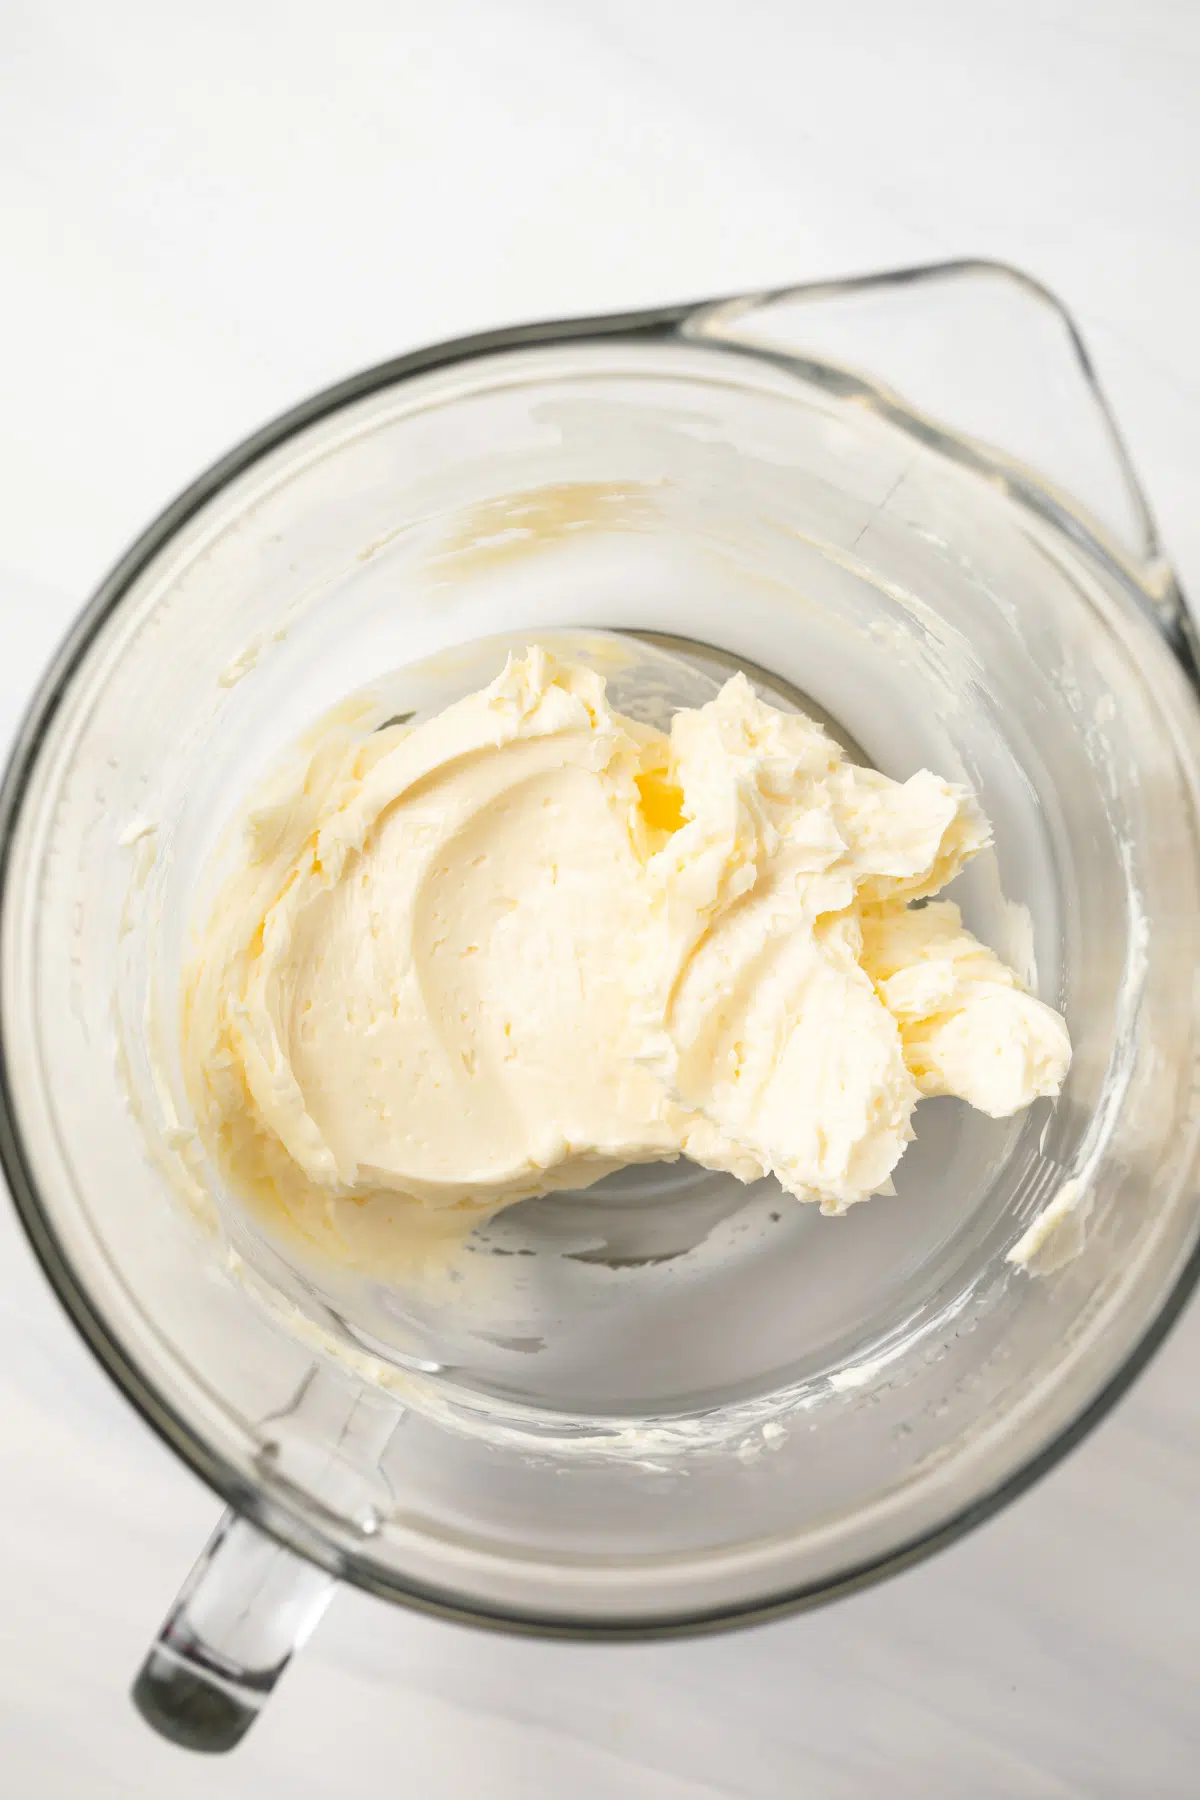 Creamed butter in a glass mixing bowl.